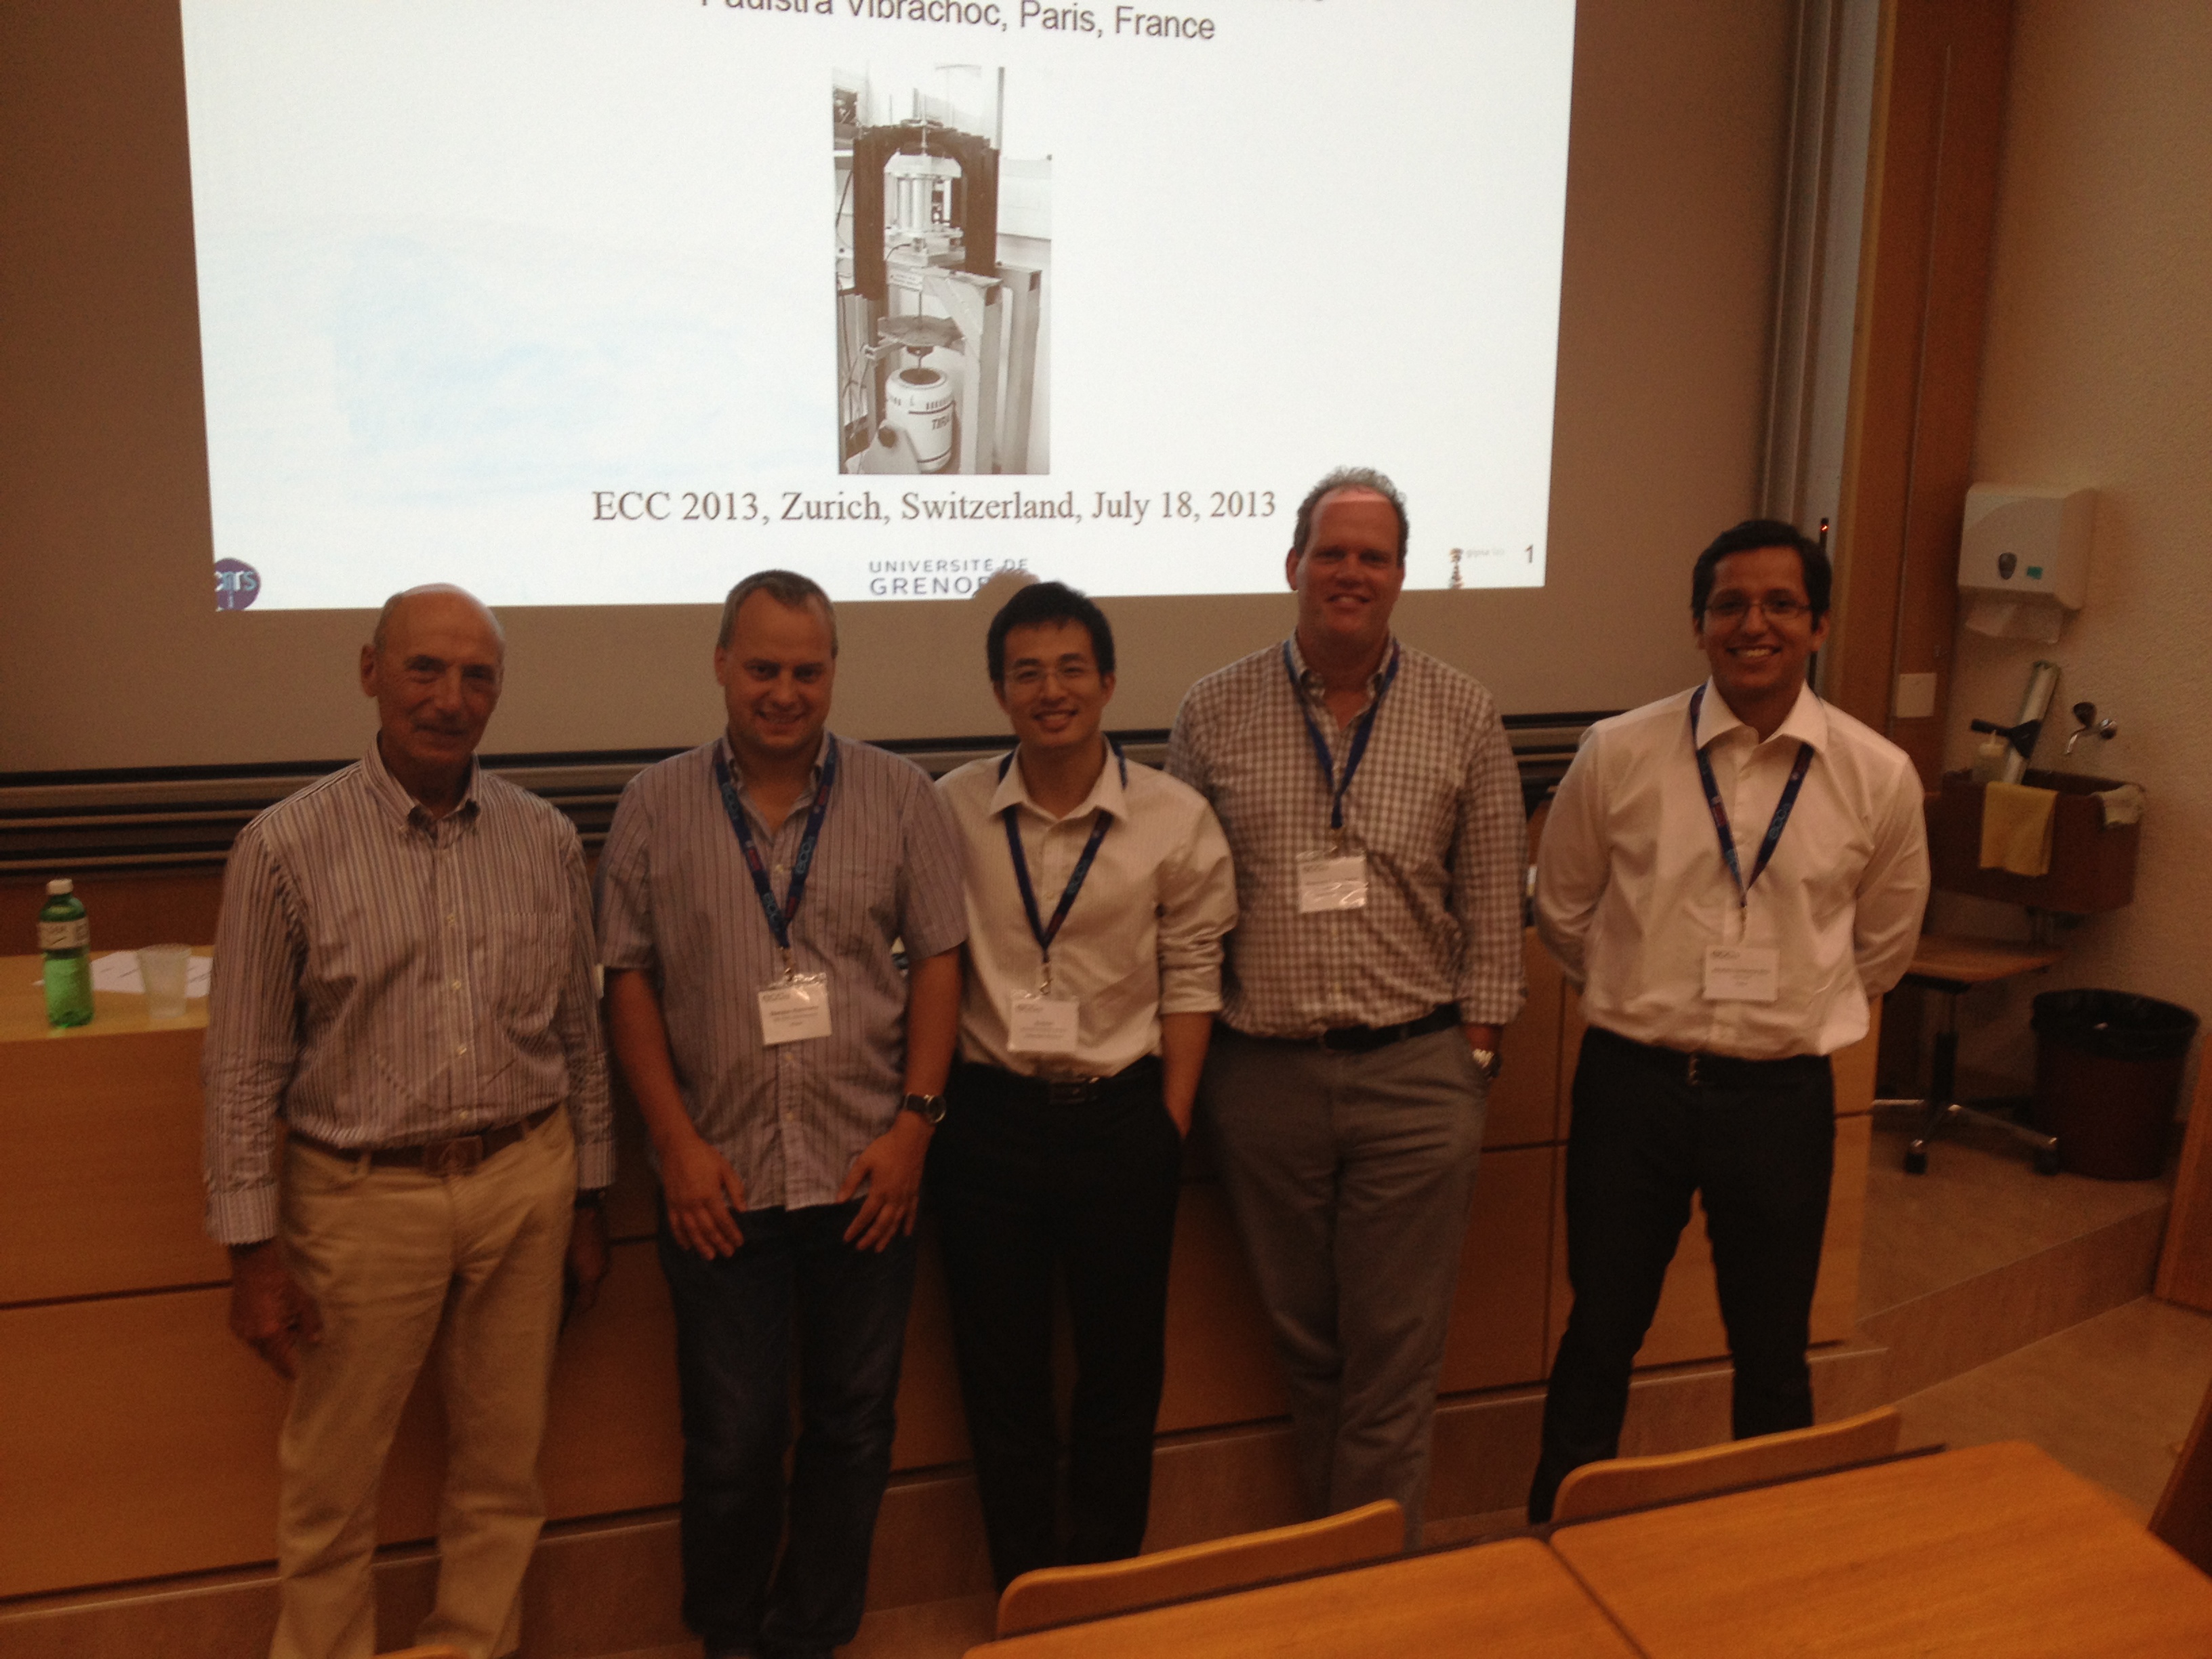 Photo of the participants in the invited session at the ECC13 at Zurich, SSwitzerland